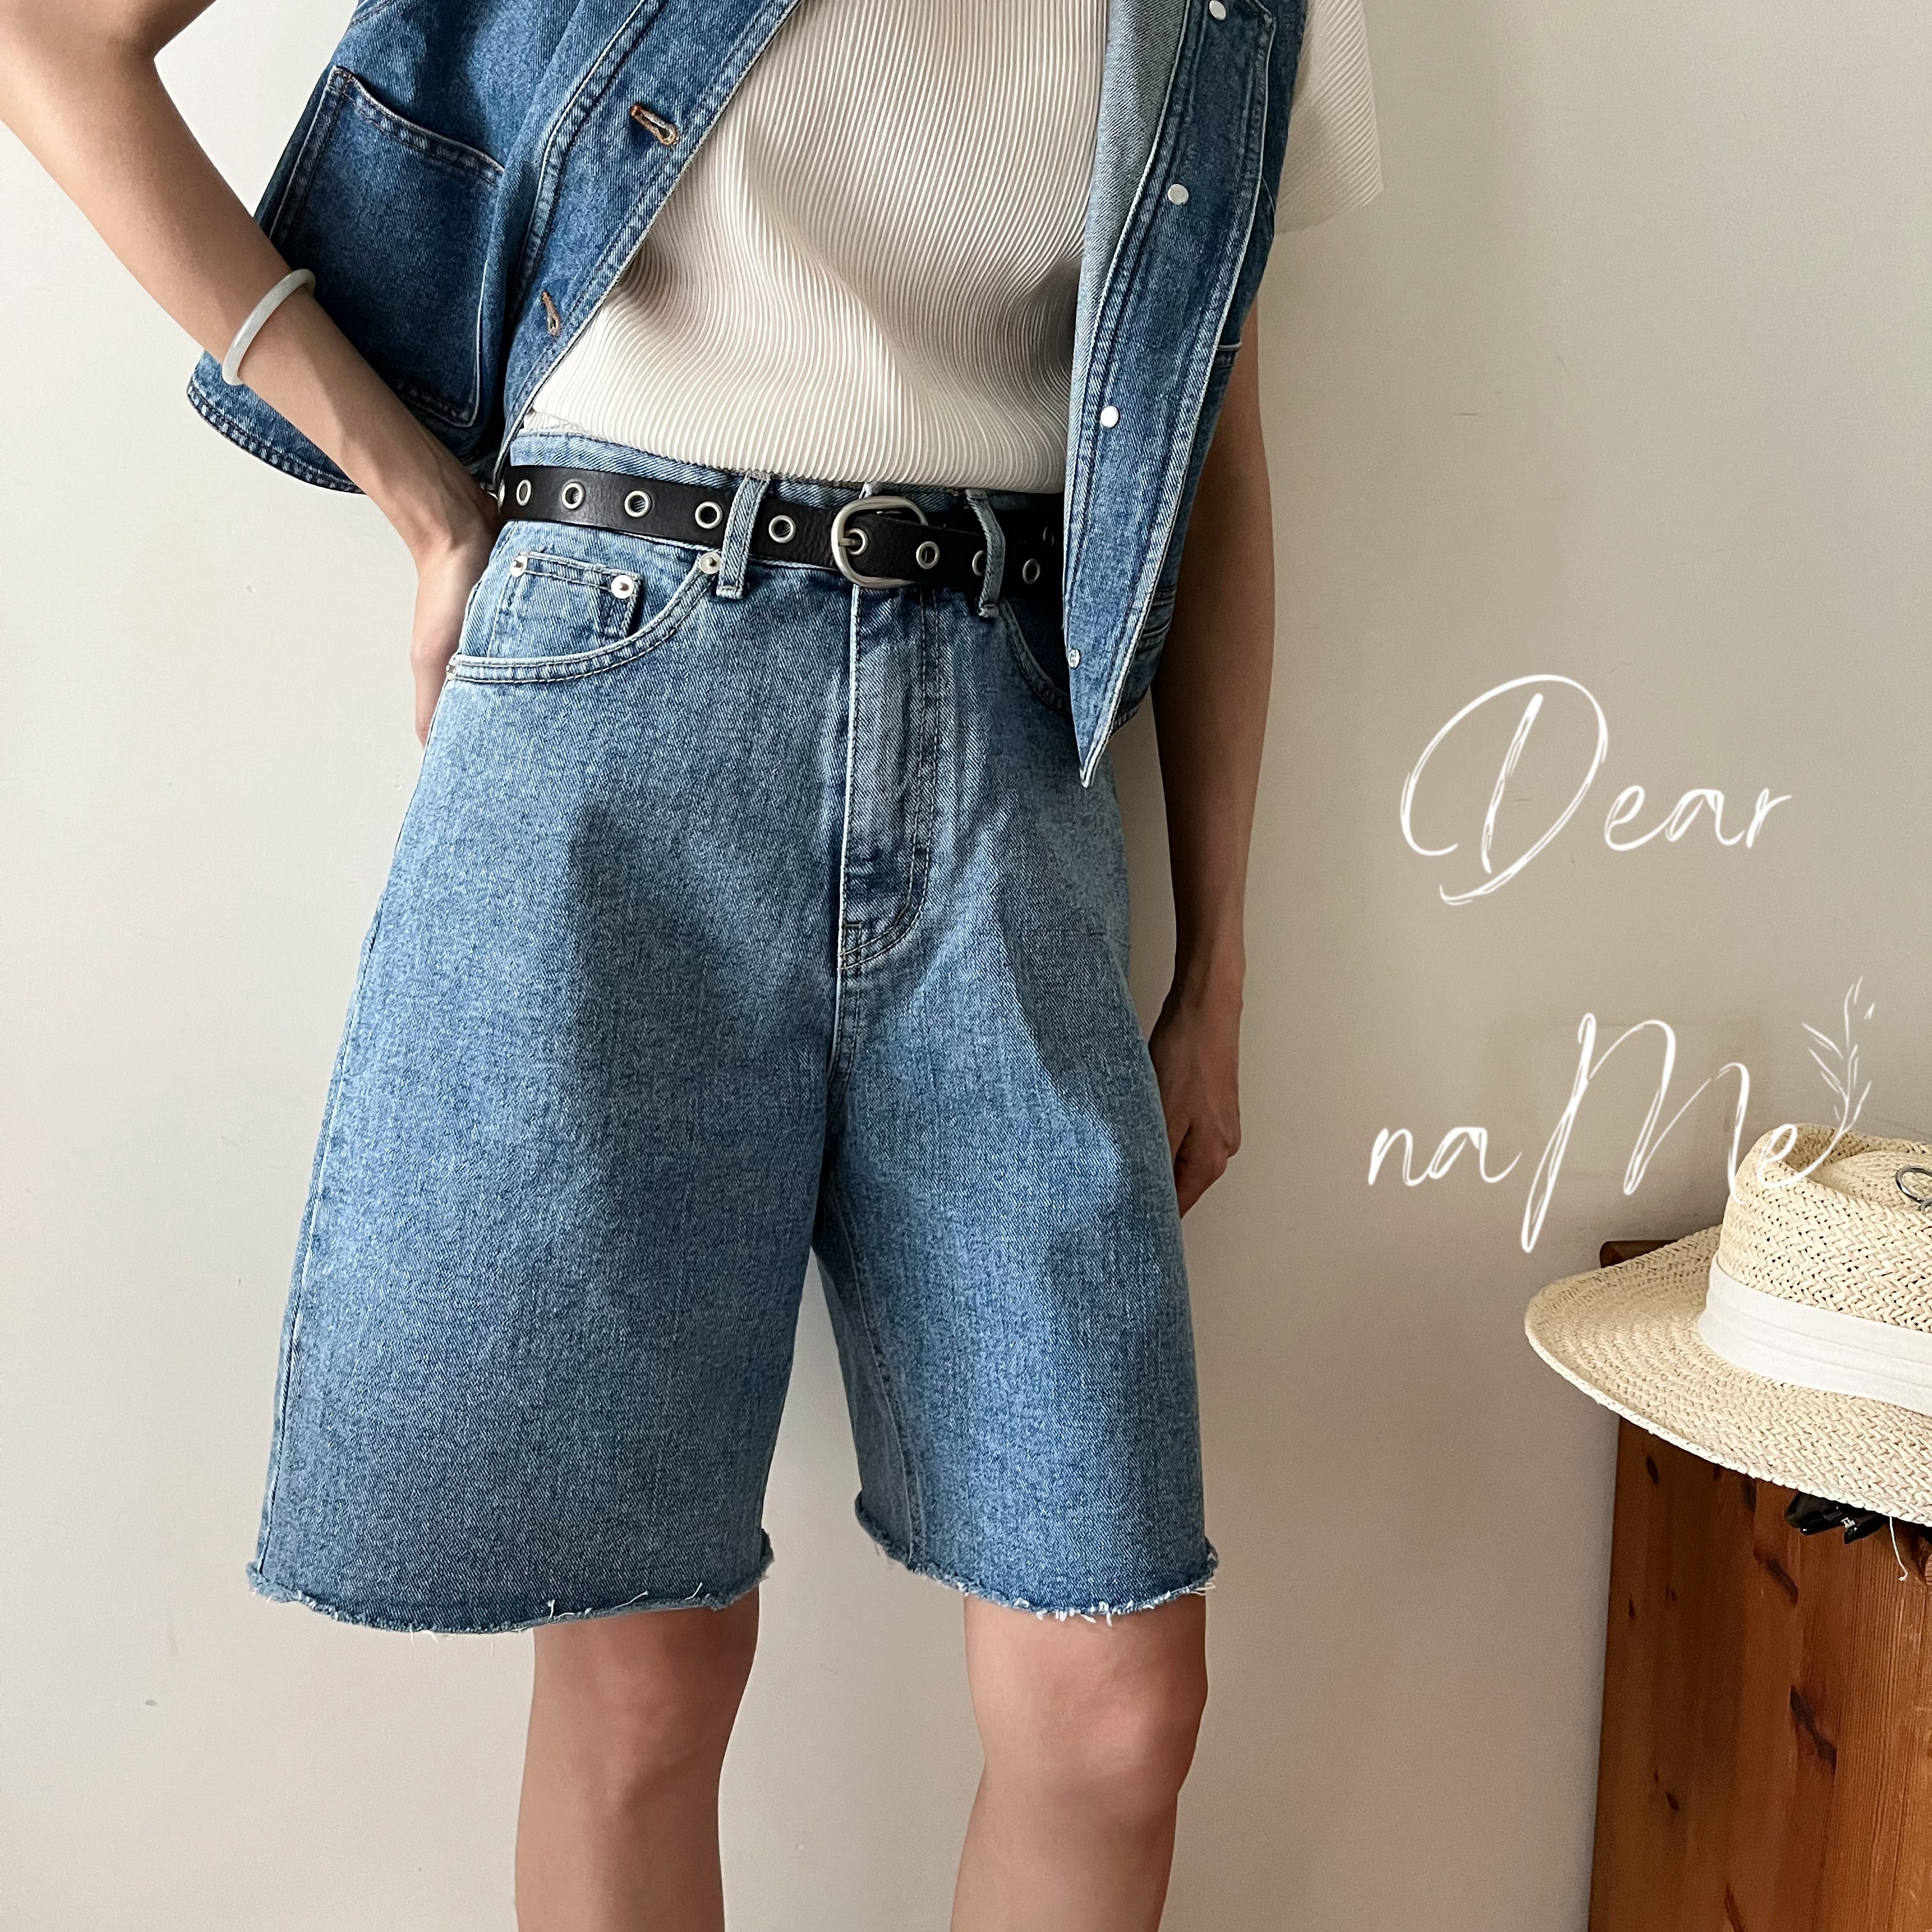 7 Ways to Wear Denim Shorts – Lex Loves Couture by Alexa Alfonso